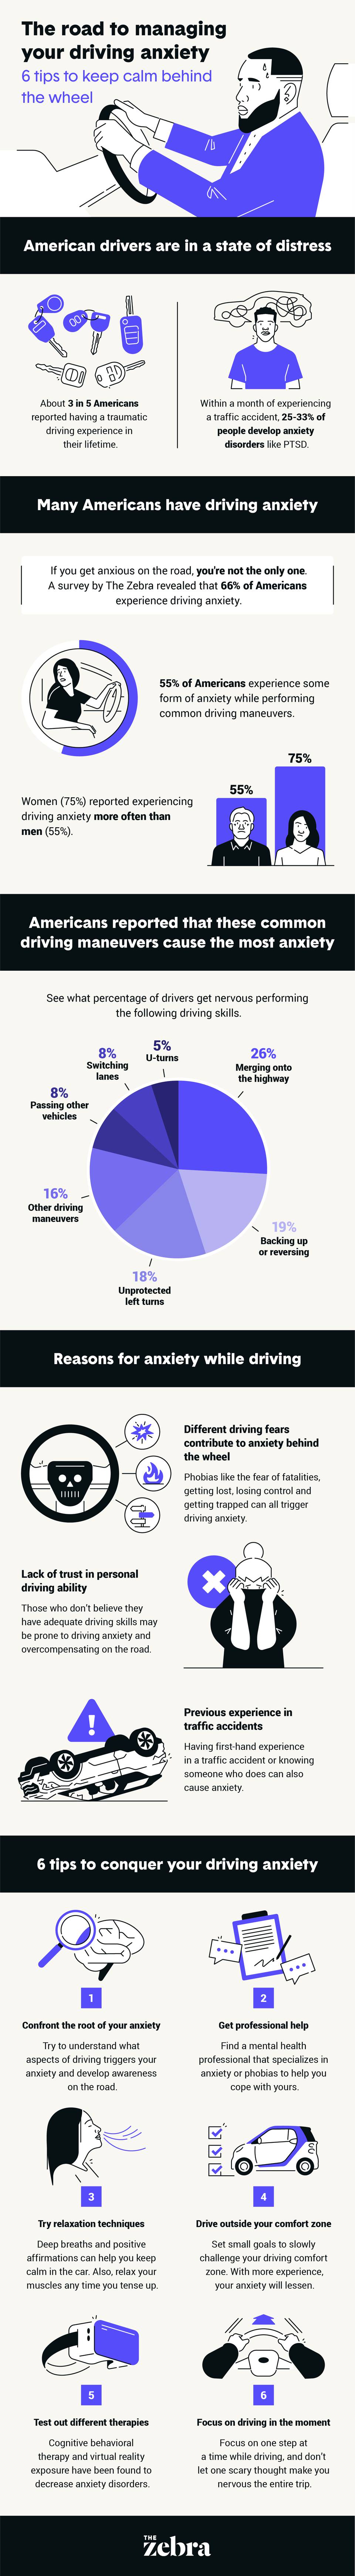 8 Ways to Increase Your Driving Comfort